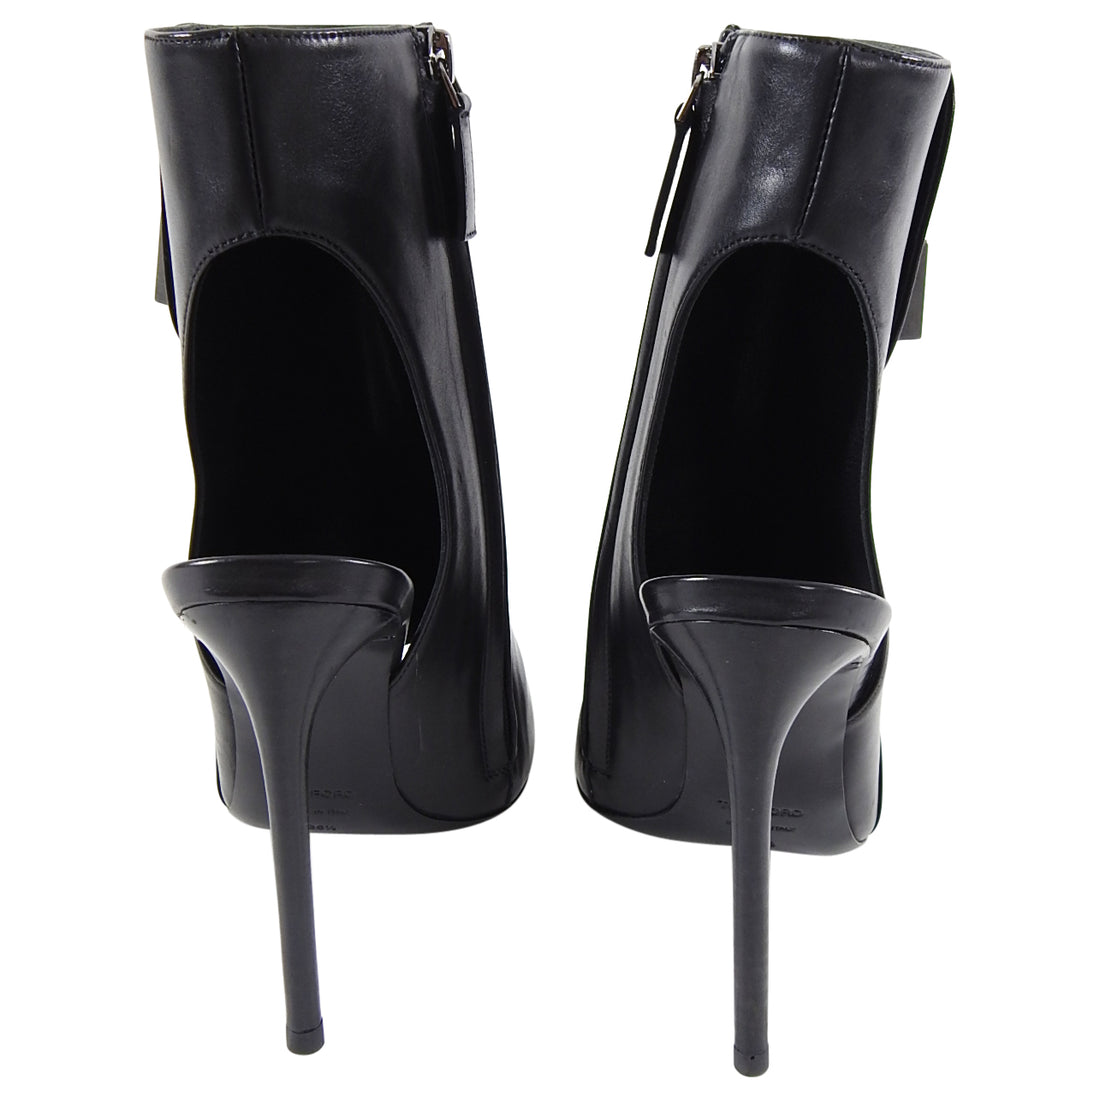 Tom Ford Black Leather Padlock Open Toe and Heel Booties - 36.5